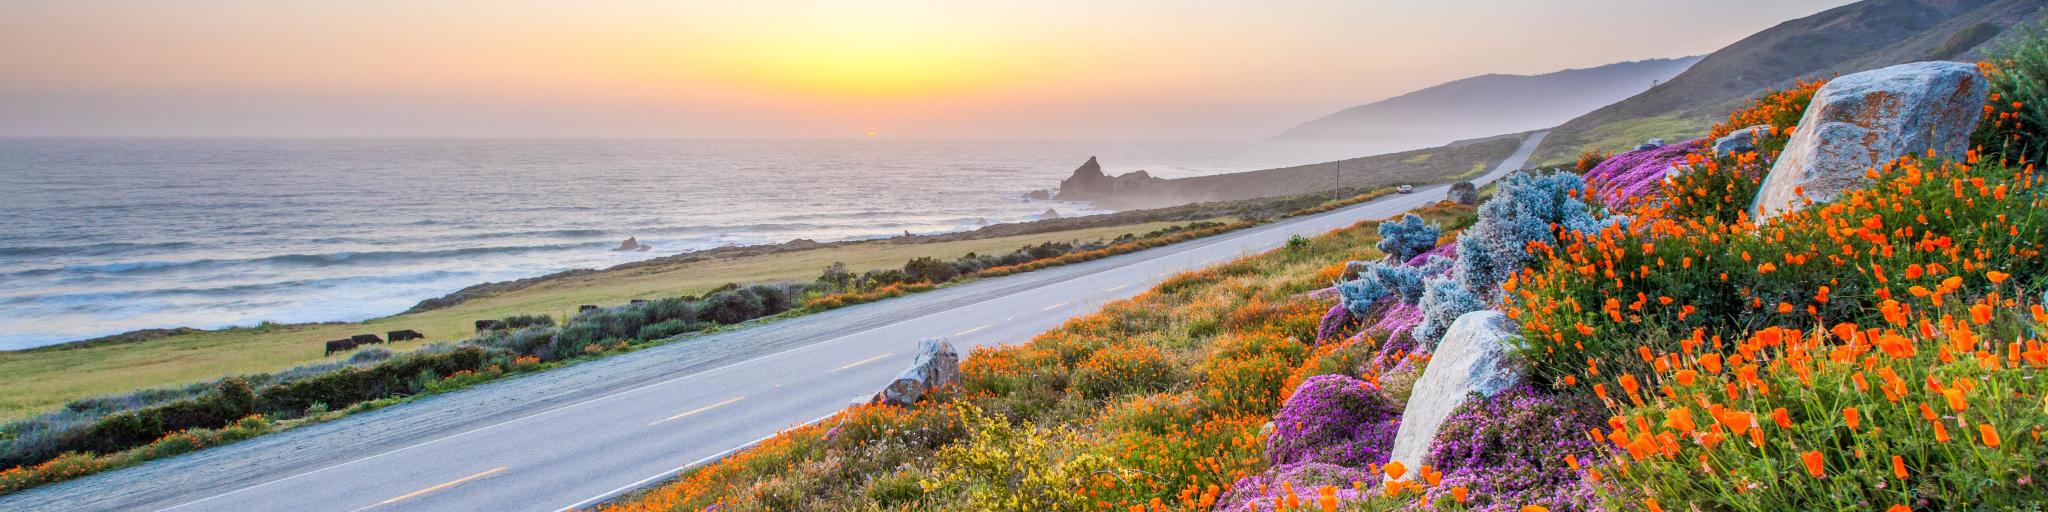 Big Sure California with wild flowers in the foreground separated by a road  and the coastline in the background at sunset.